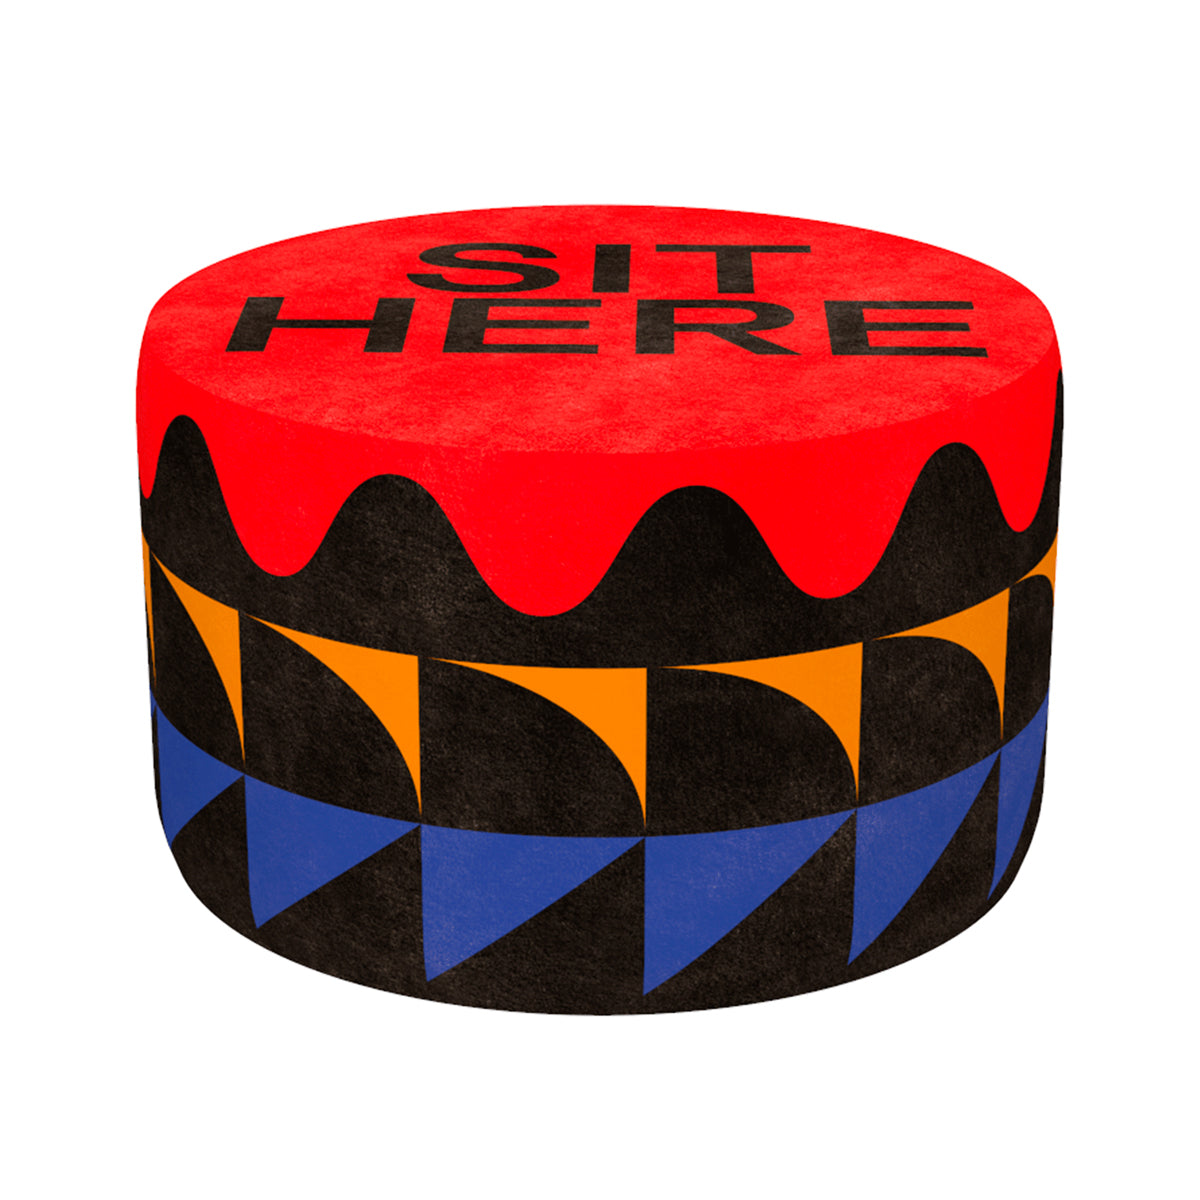 Oggian Sit Here Red Pouf M by Marco Oggian - Qeeboo